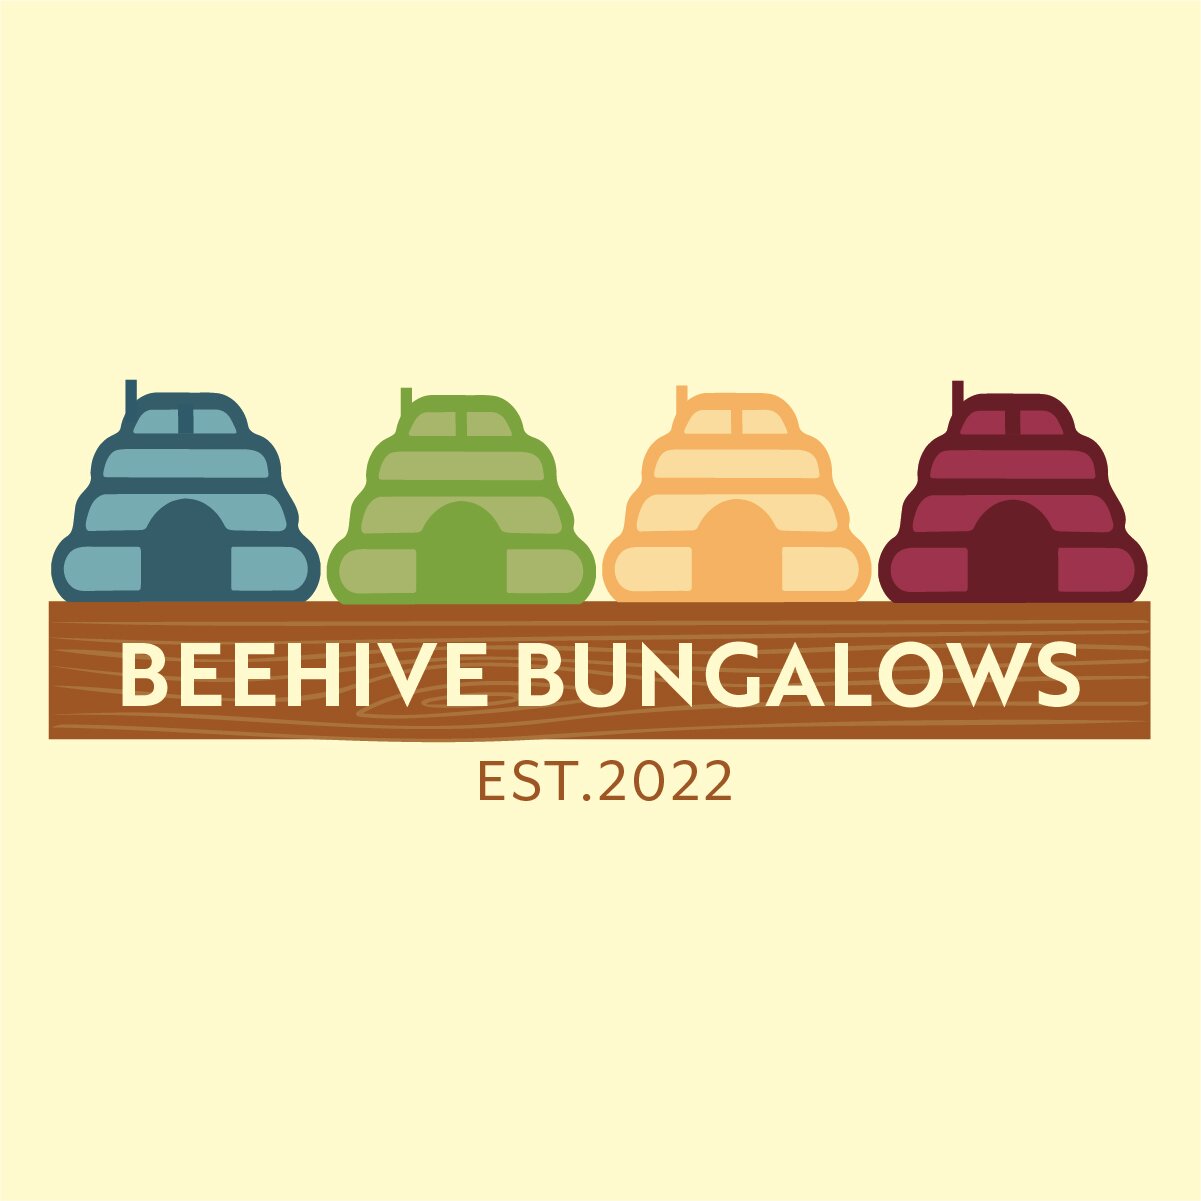 Beehive Bungalows